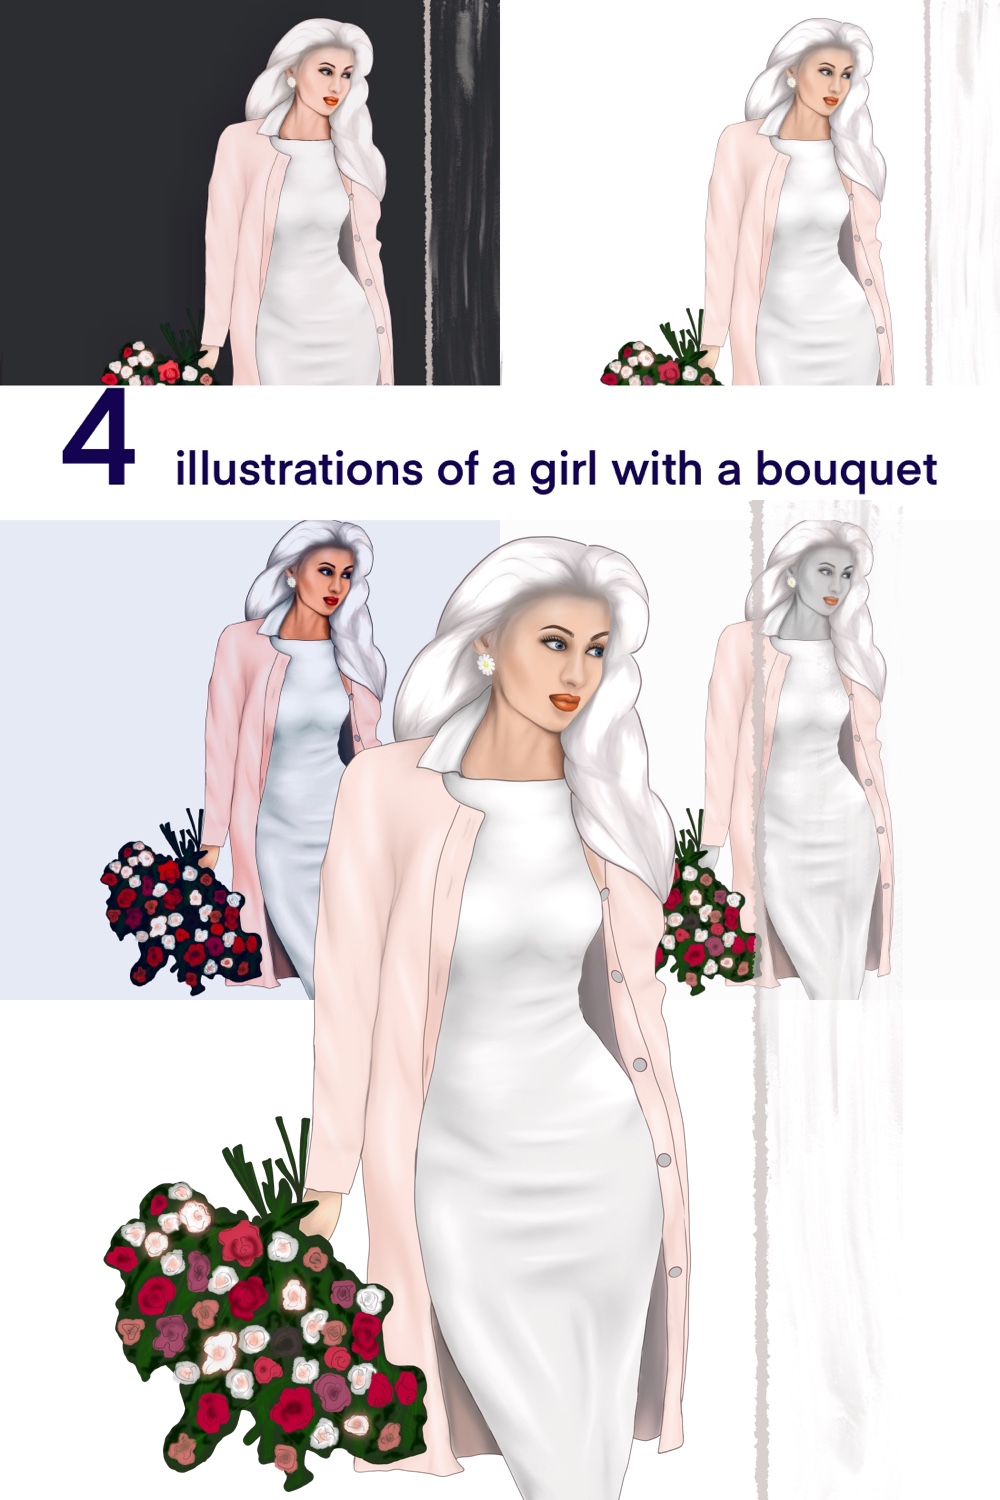 Illustrations of a Girl with a Bouquet pinterest image.